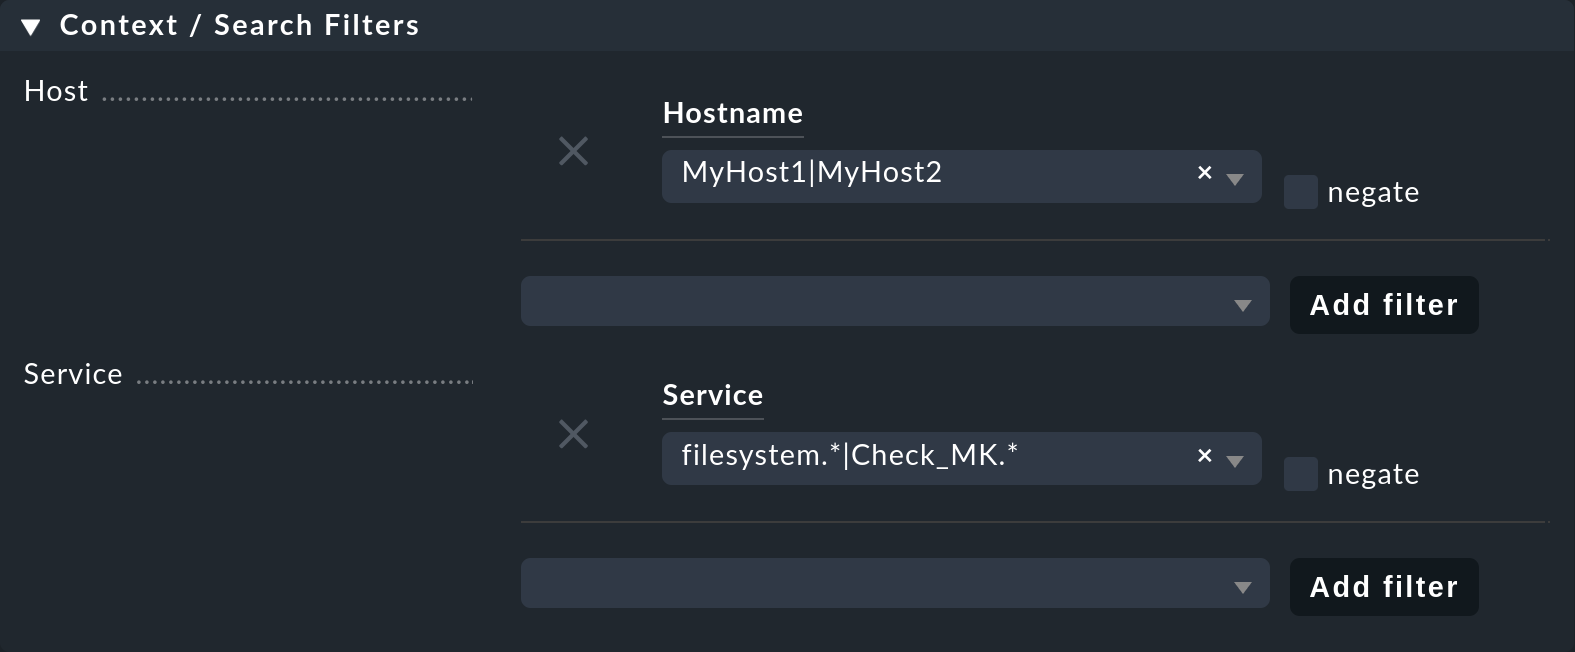 Filter selecting hosts and services for the view.